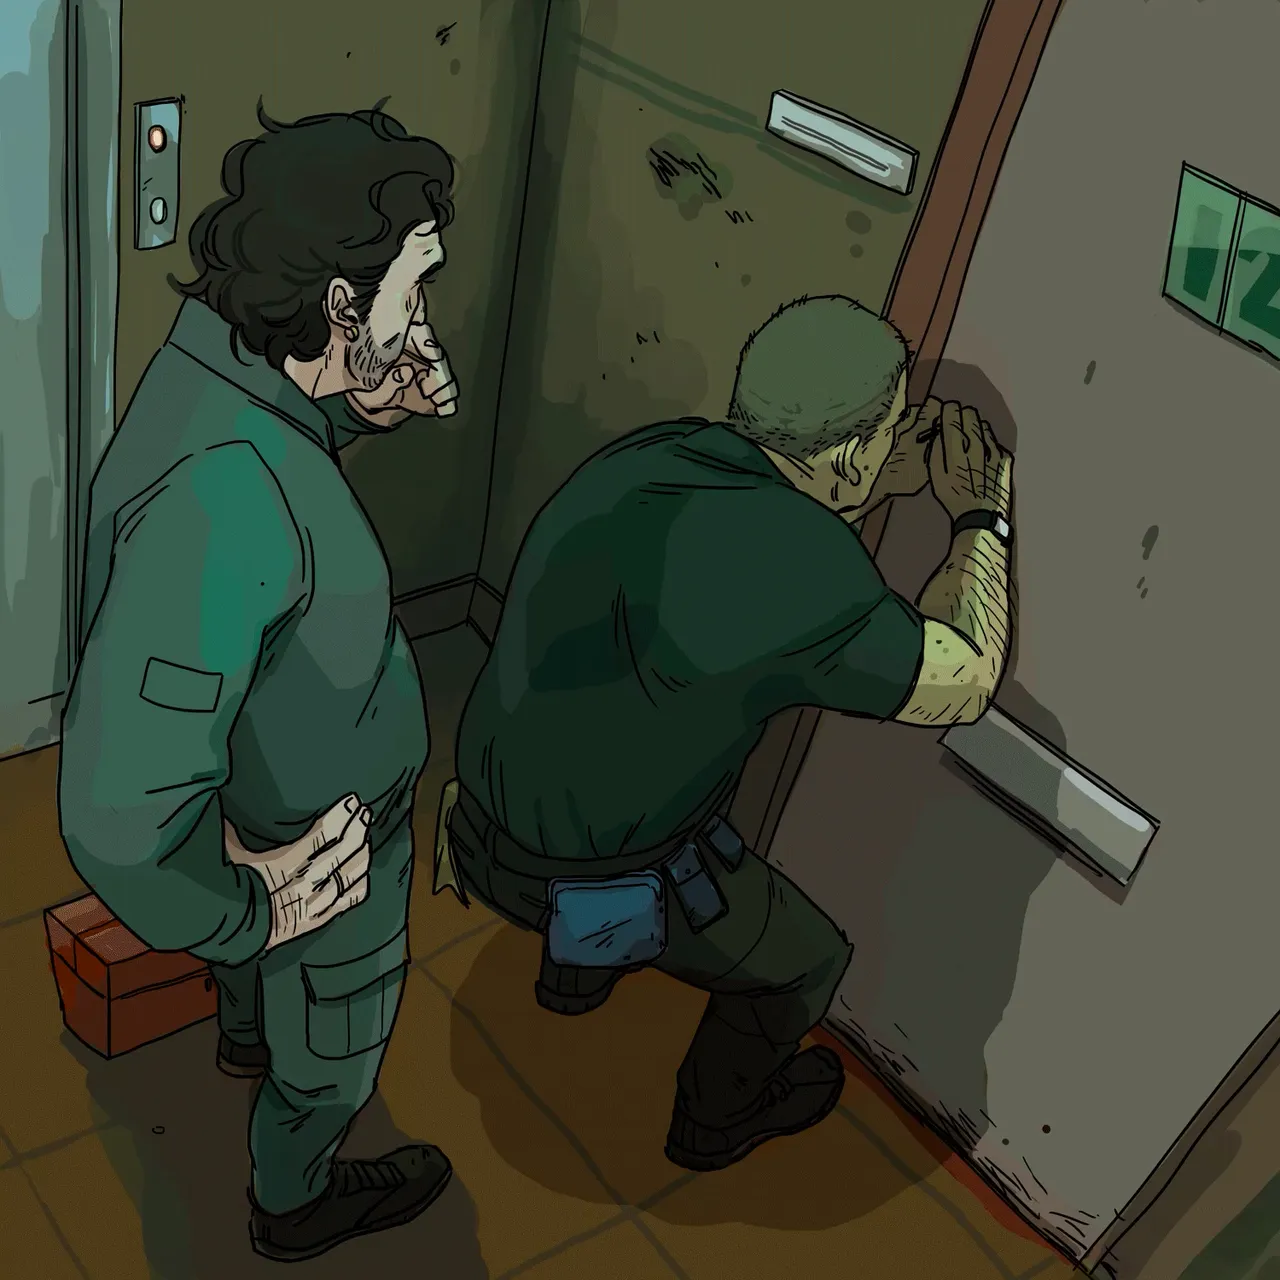 there's always something horrible going on behind locked doors. sometimes someone has to break in to help you out. but do they want to know what's really going on? and do you really want the help? Just a surreal scene with a humdrum vibe. https://foundation.app/@artbotas/something-horrible-28877